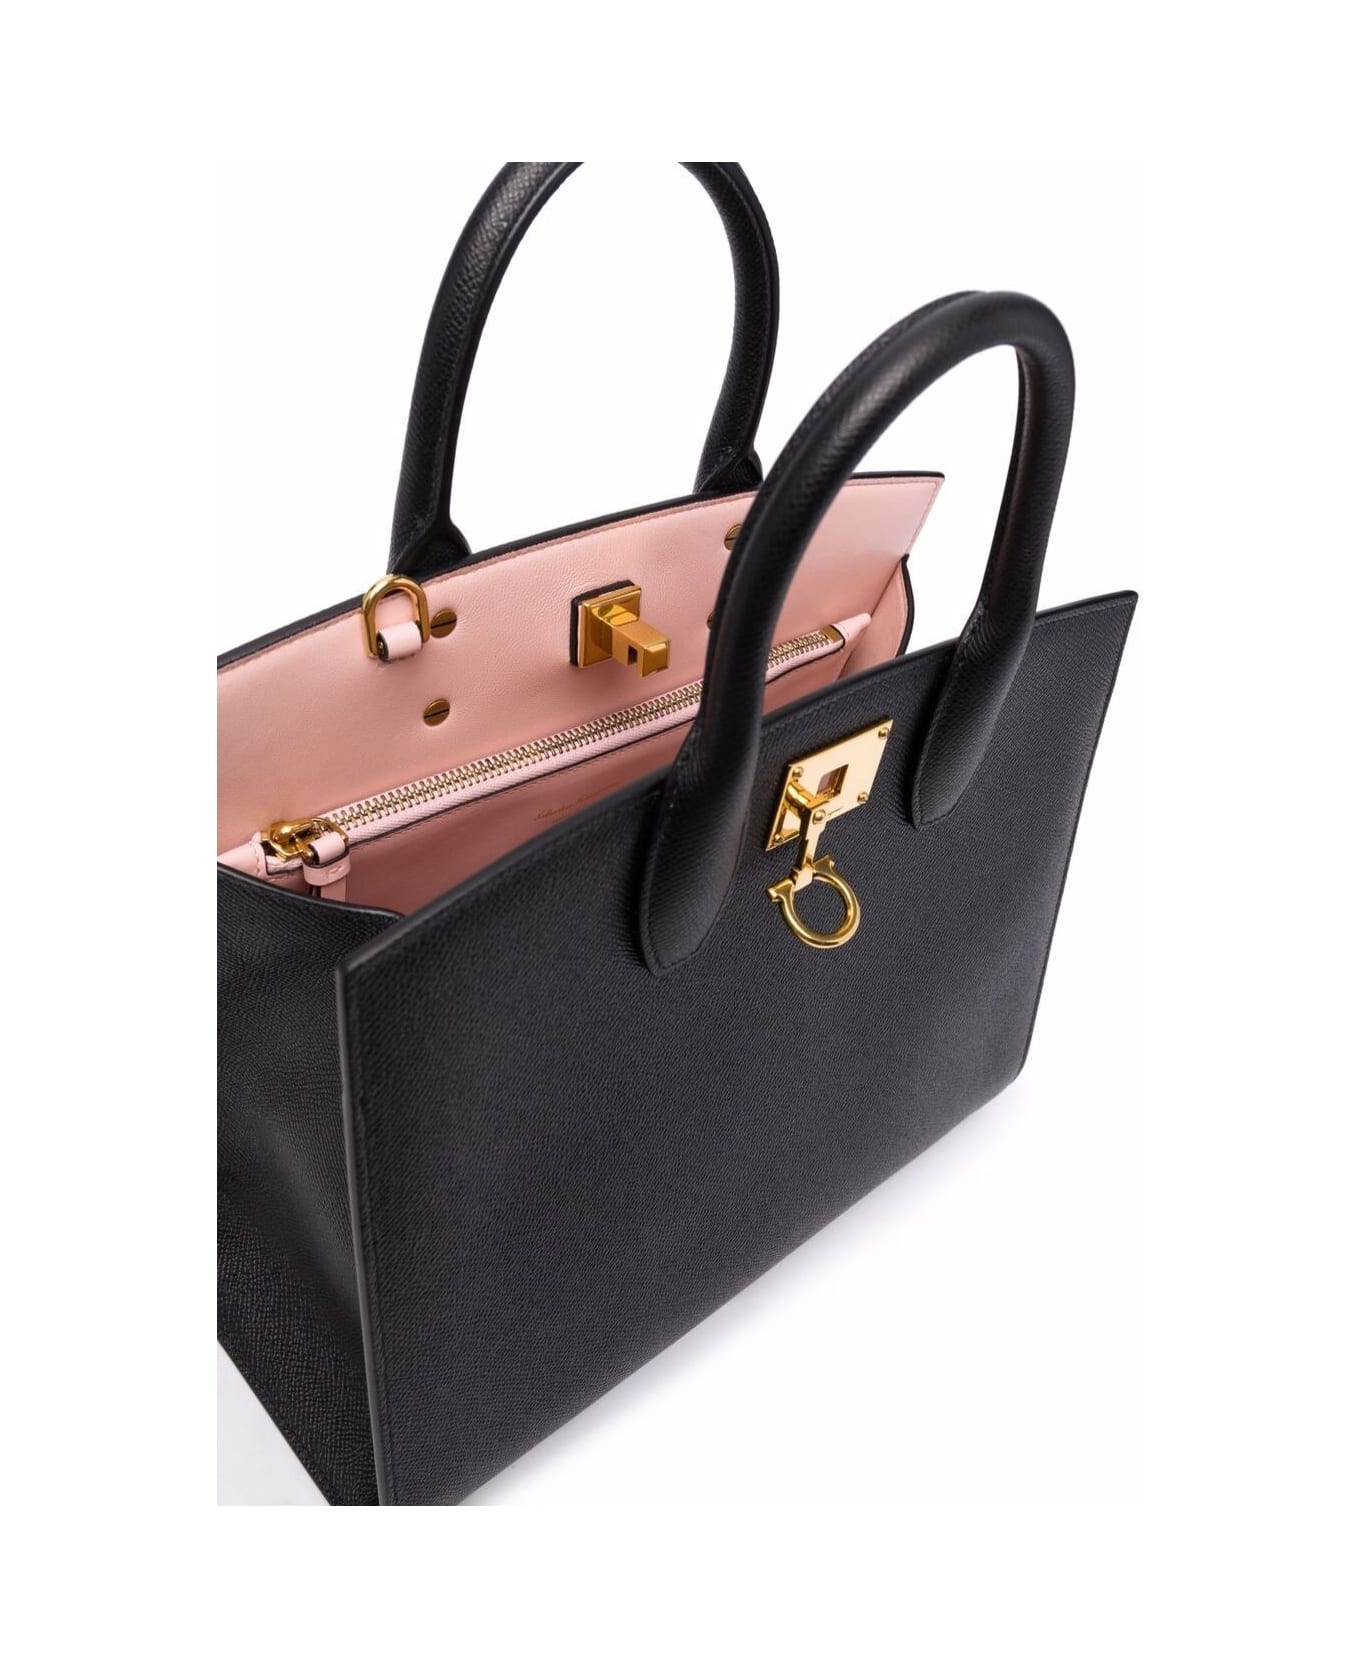 Ferragamo 'studio Box' Black Bag With Gancini Buckle And Shoulder Strap In Grained Leather Woman